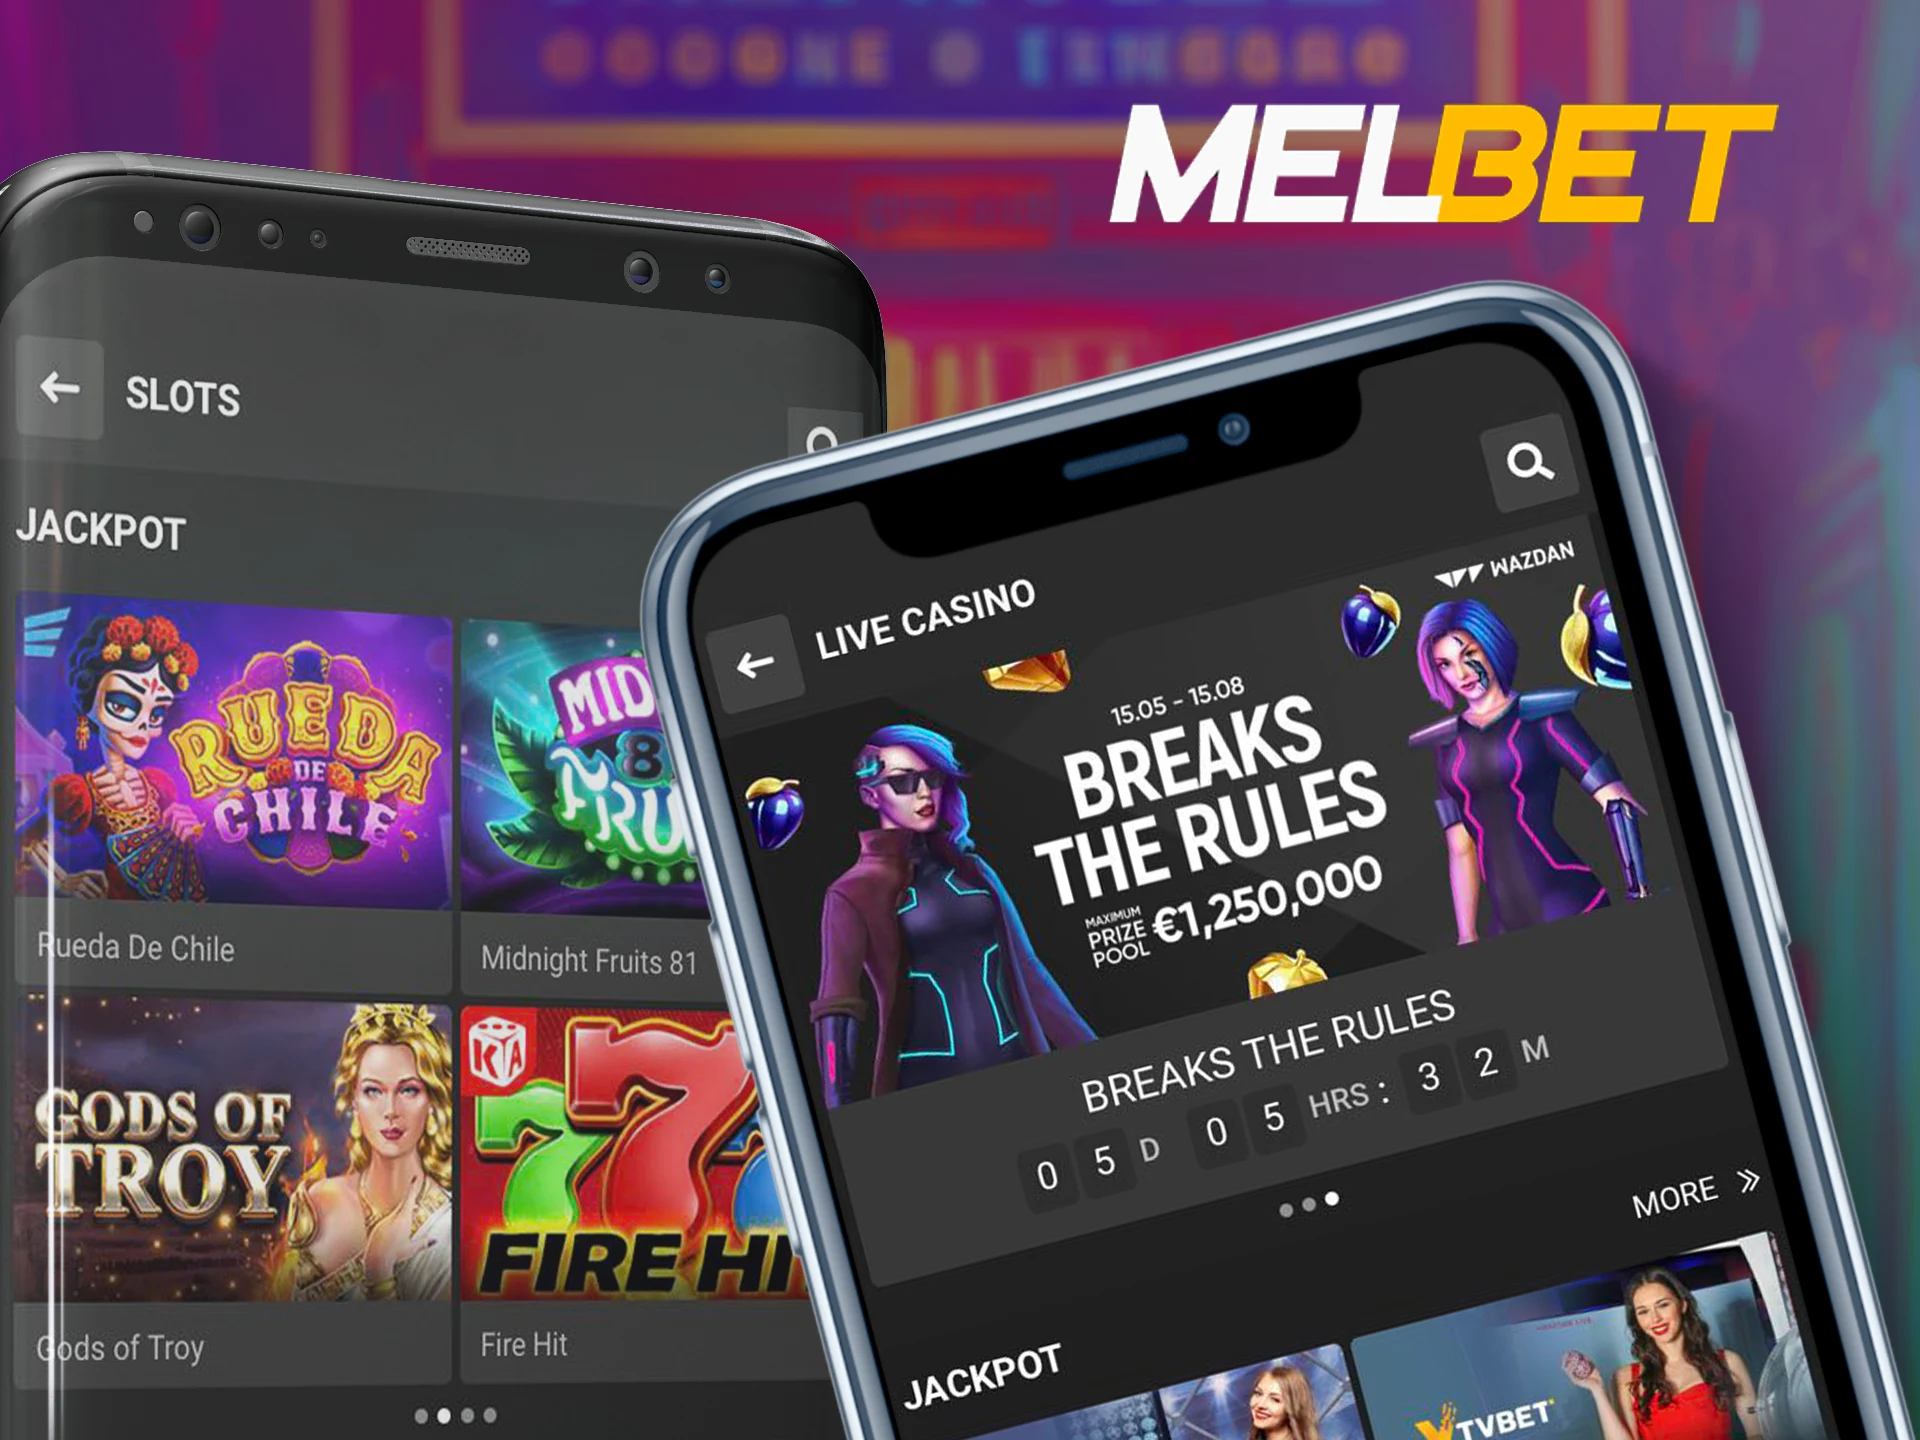 You can install the Melbet app on any of your mobile devices.